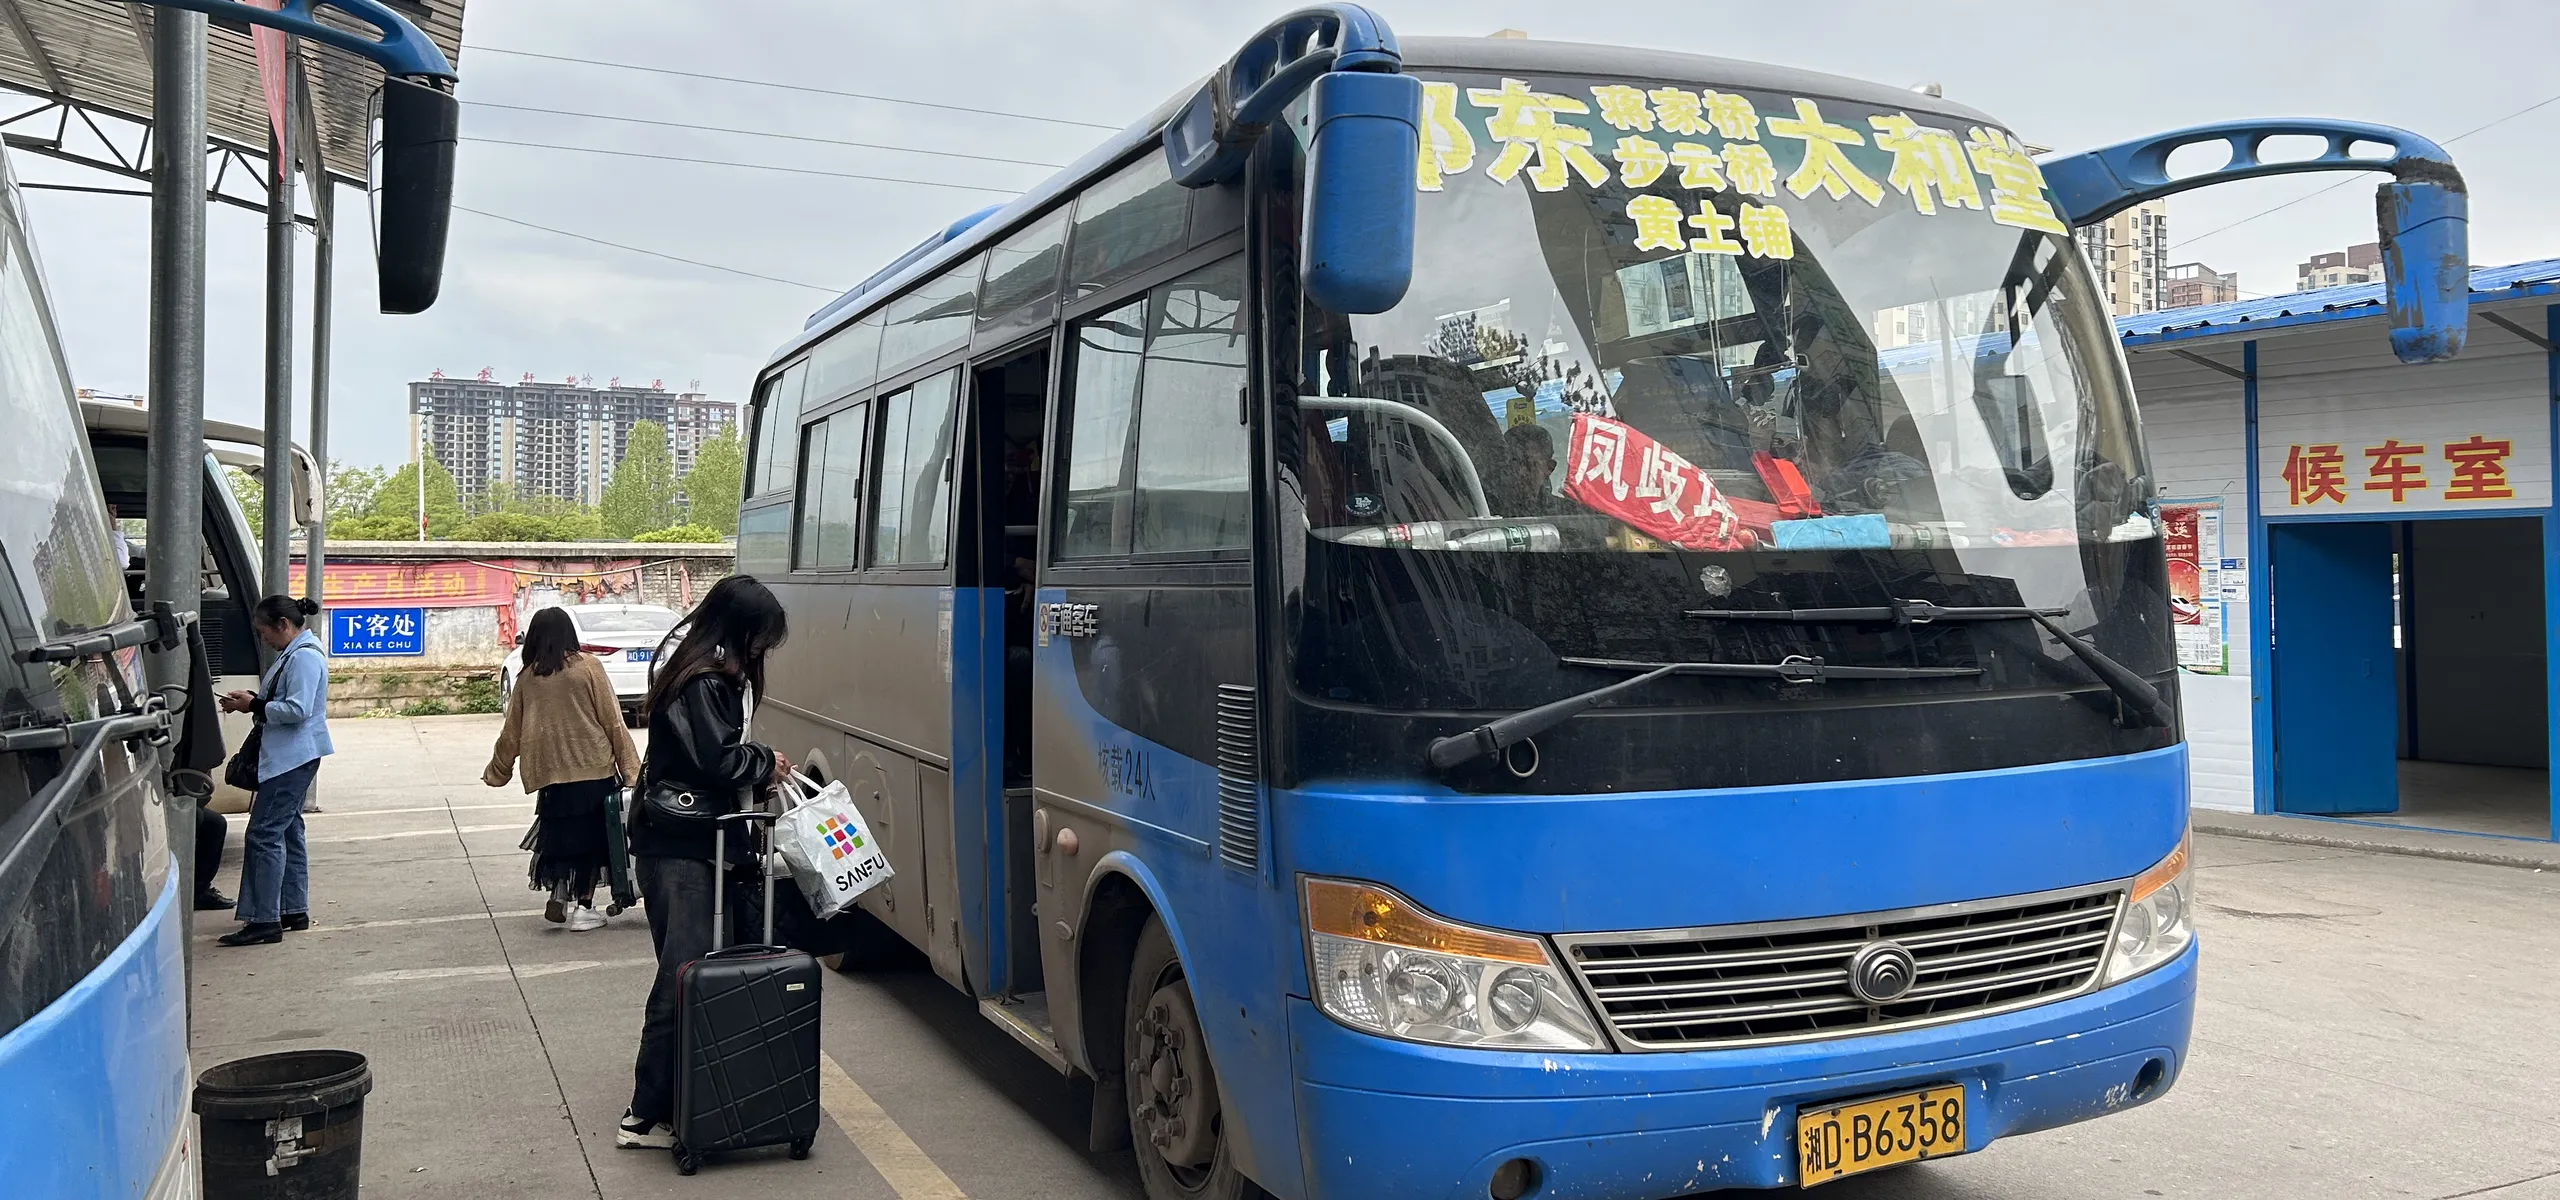 7. Residents in many western towns of Qidong also need to take the bus from Qifeng Parking Lot to Buyunqiao or the westernmost Taihetang town